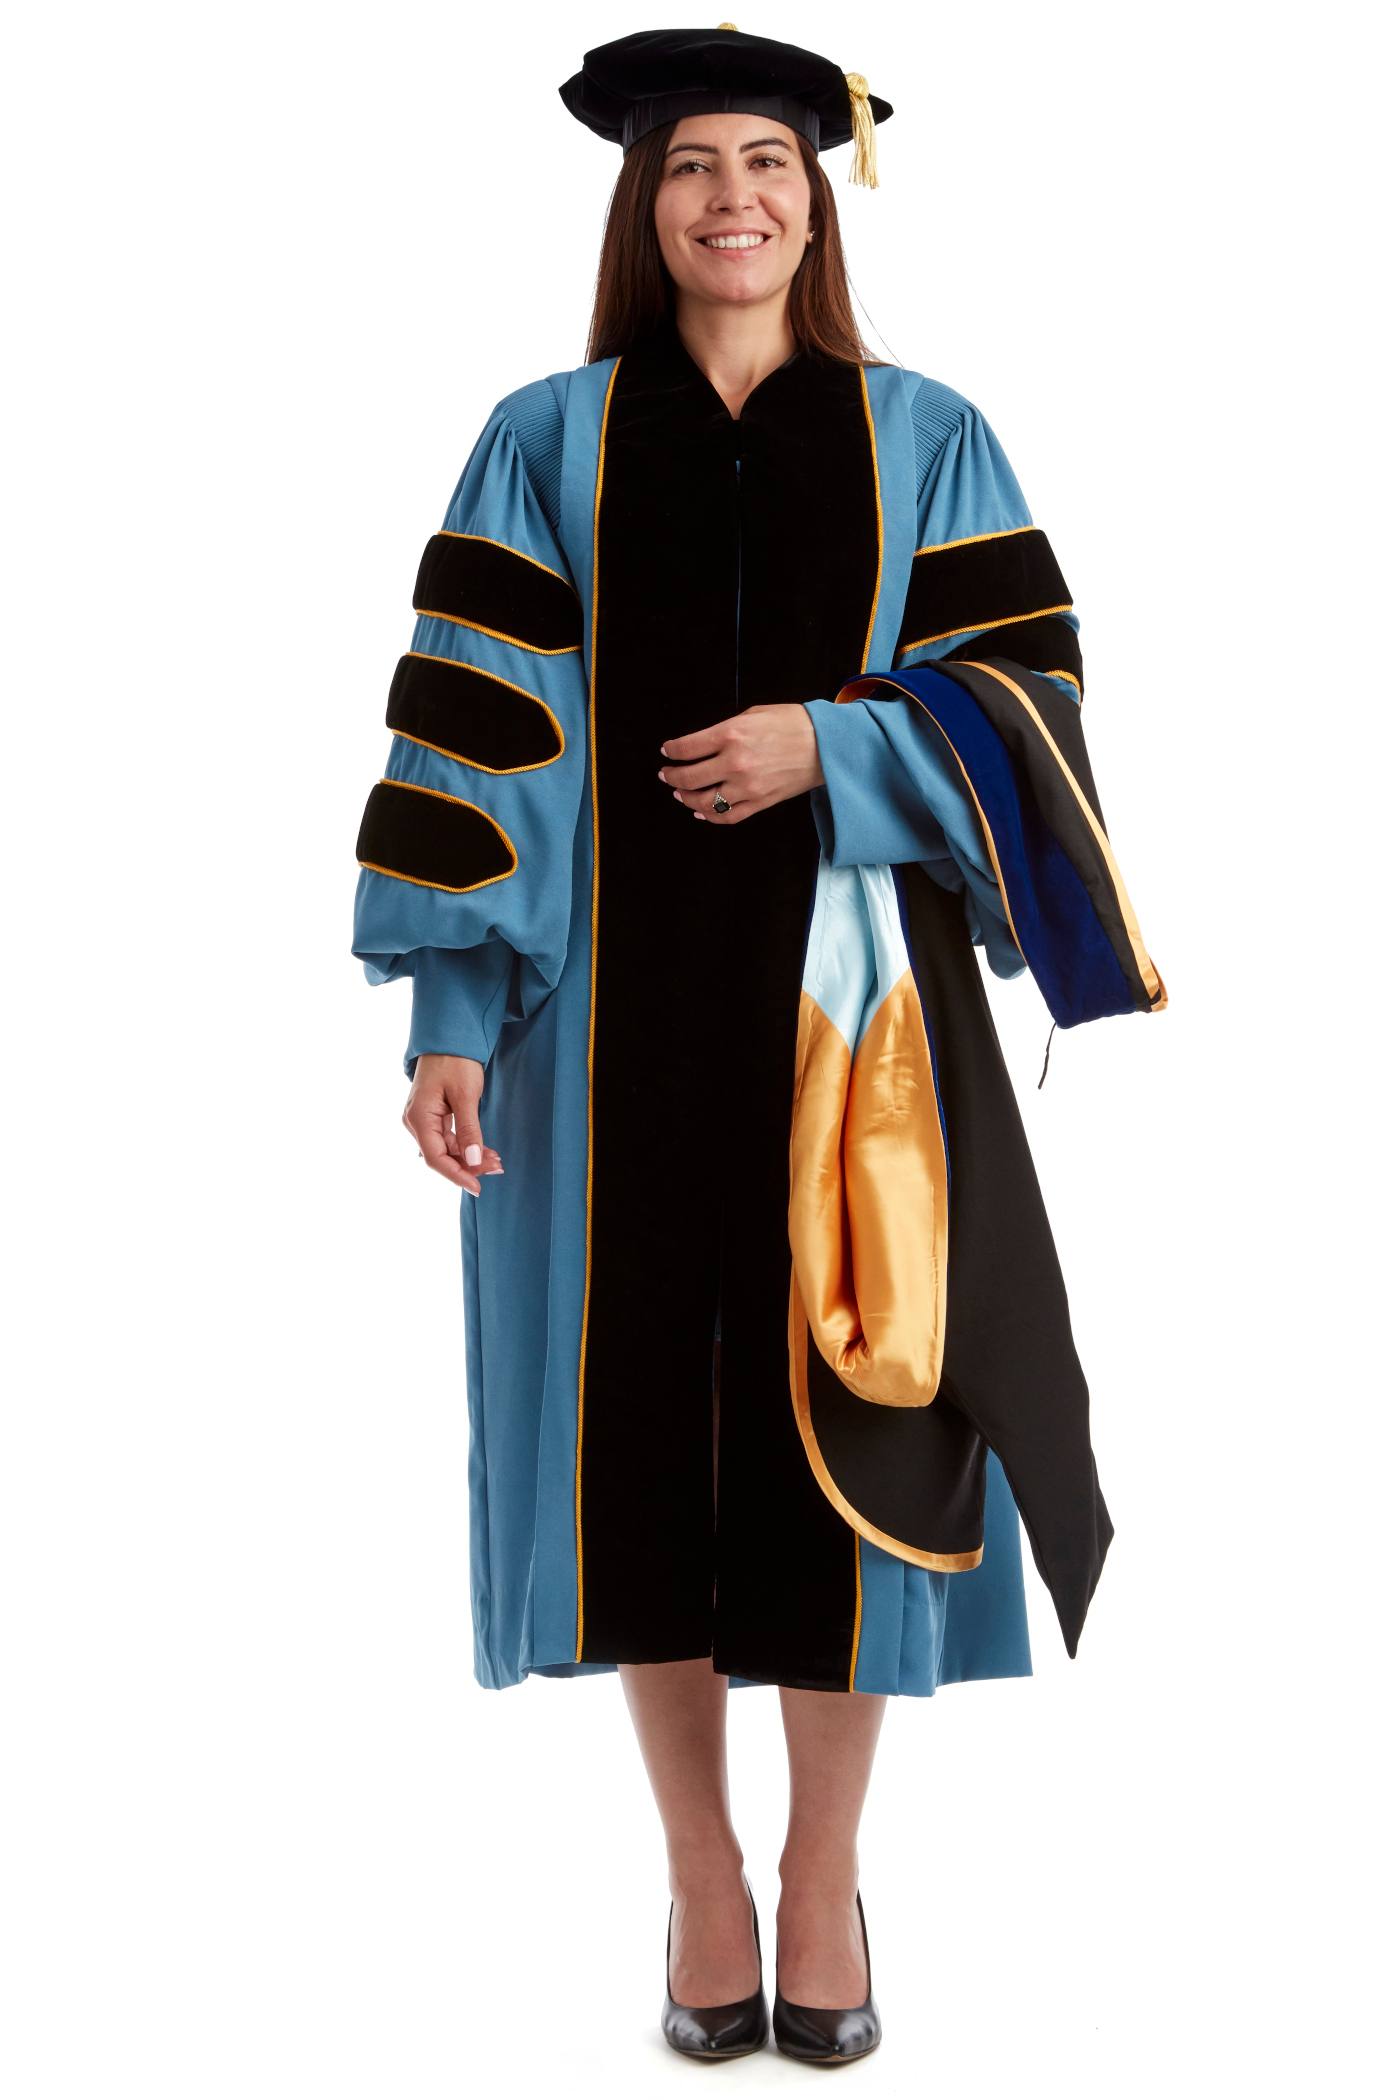 University of Michigan Doctoral Regalia. Doctoral Gown, PhD Hood, 8-sided Doctoral Tam with Tassel - CAPGOWN